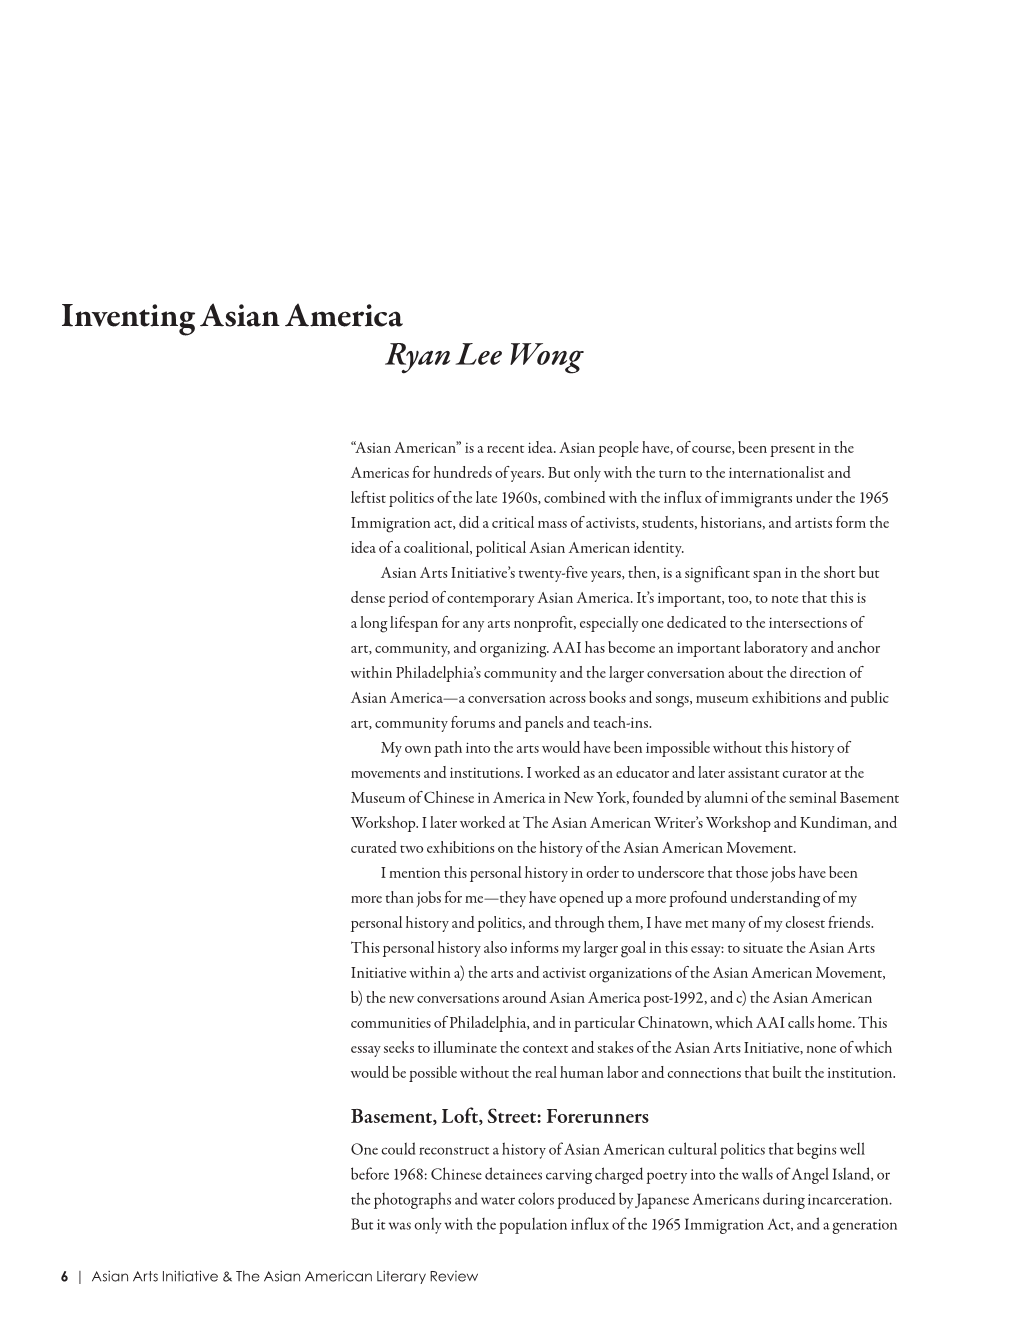 Inventing Asian America by Ryan Lee Wong